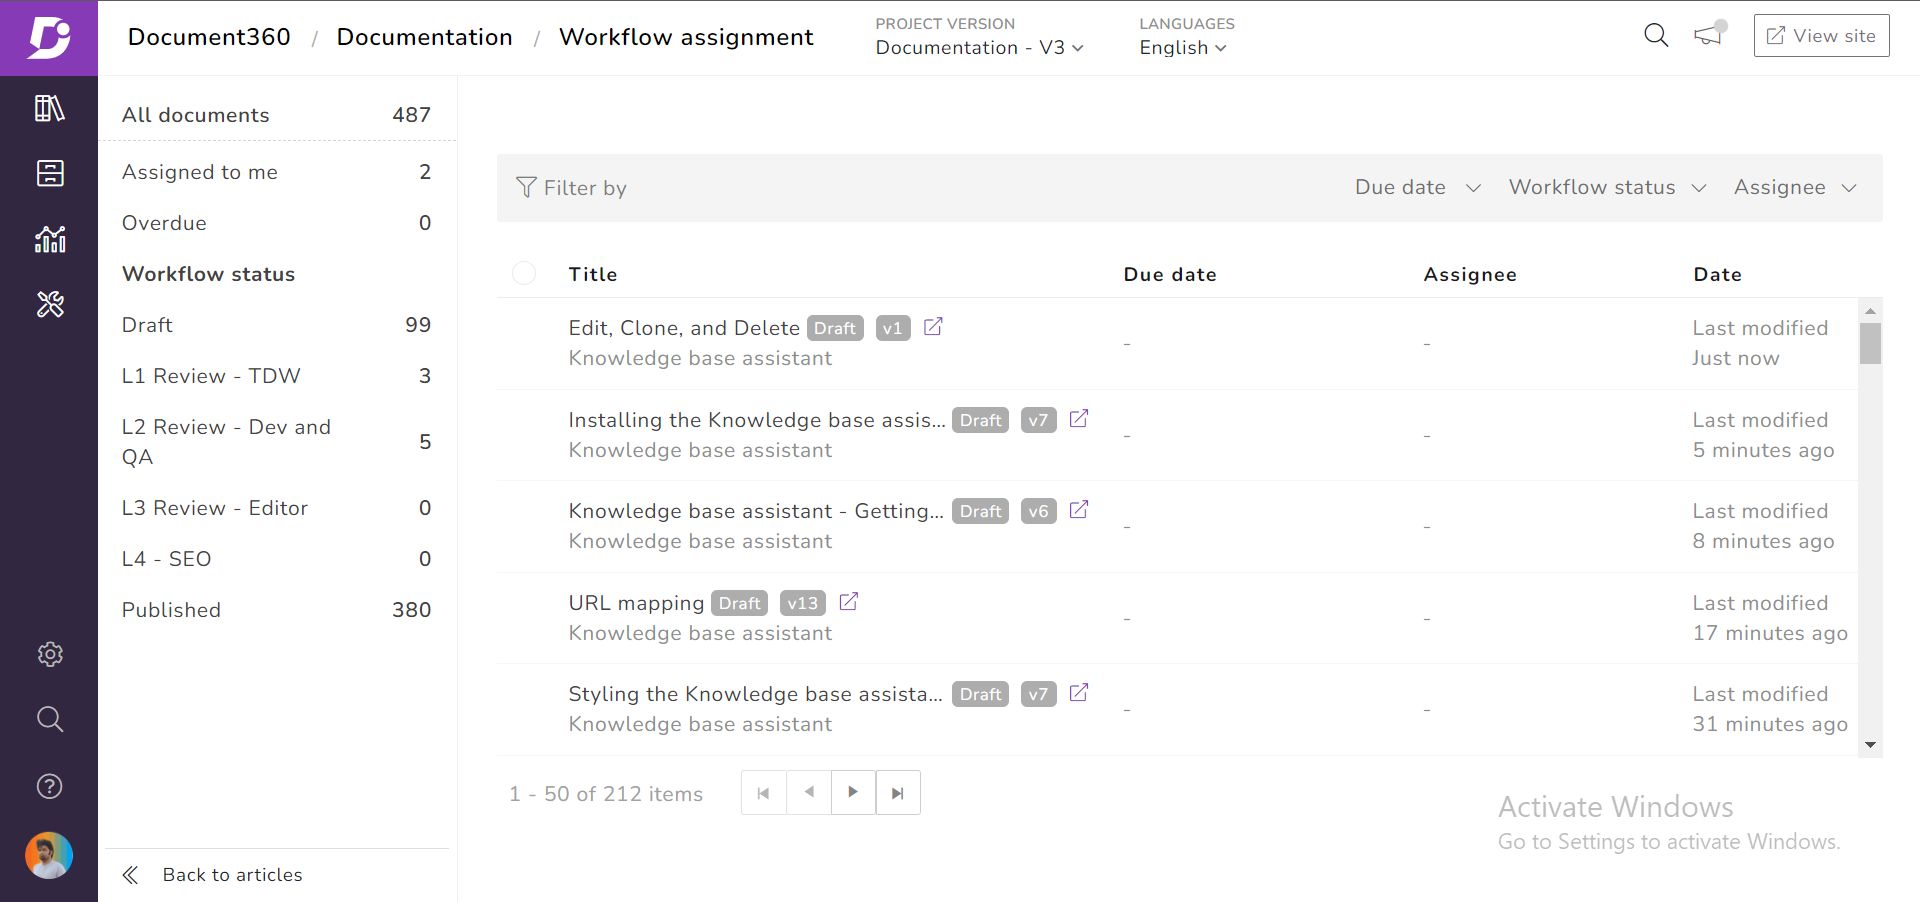 Workflow assignment overview